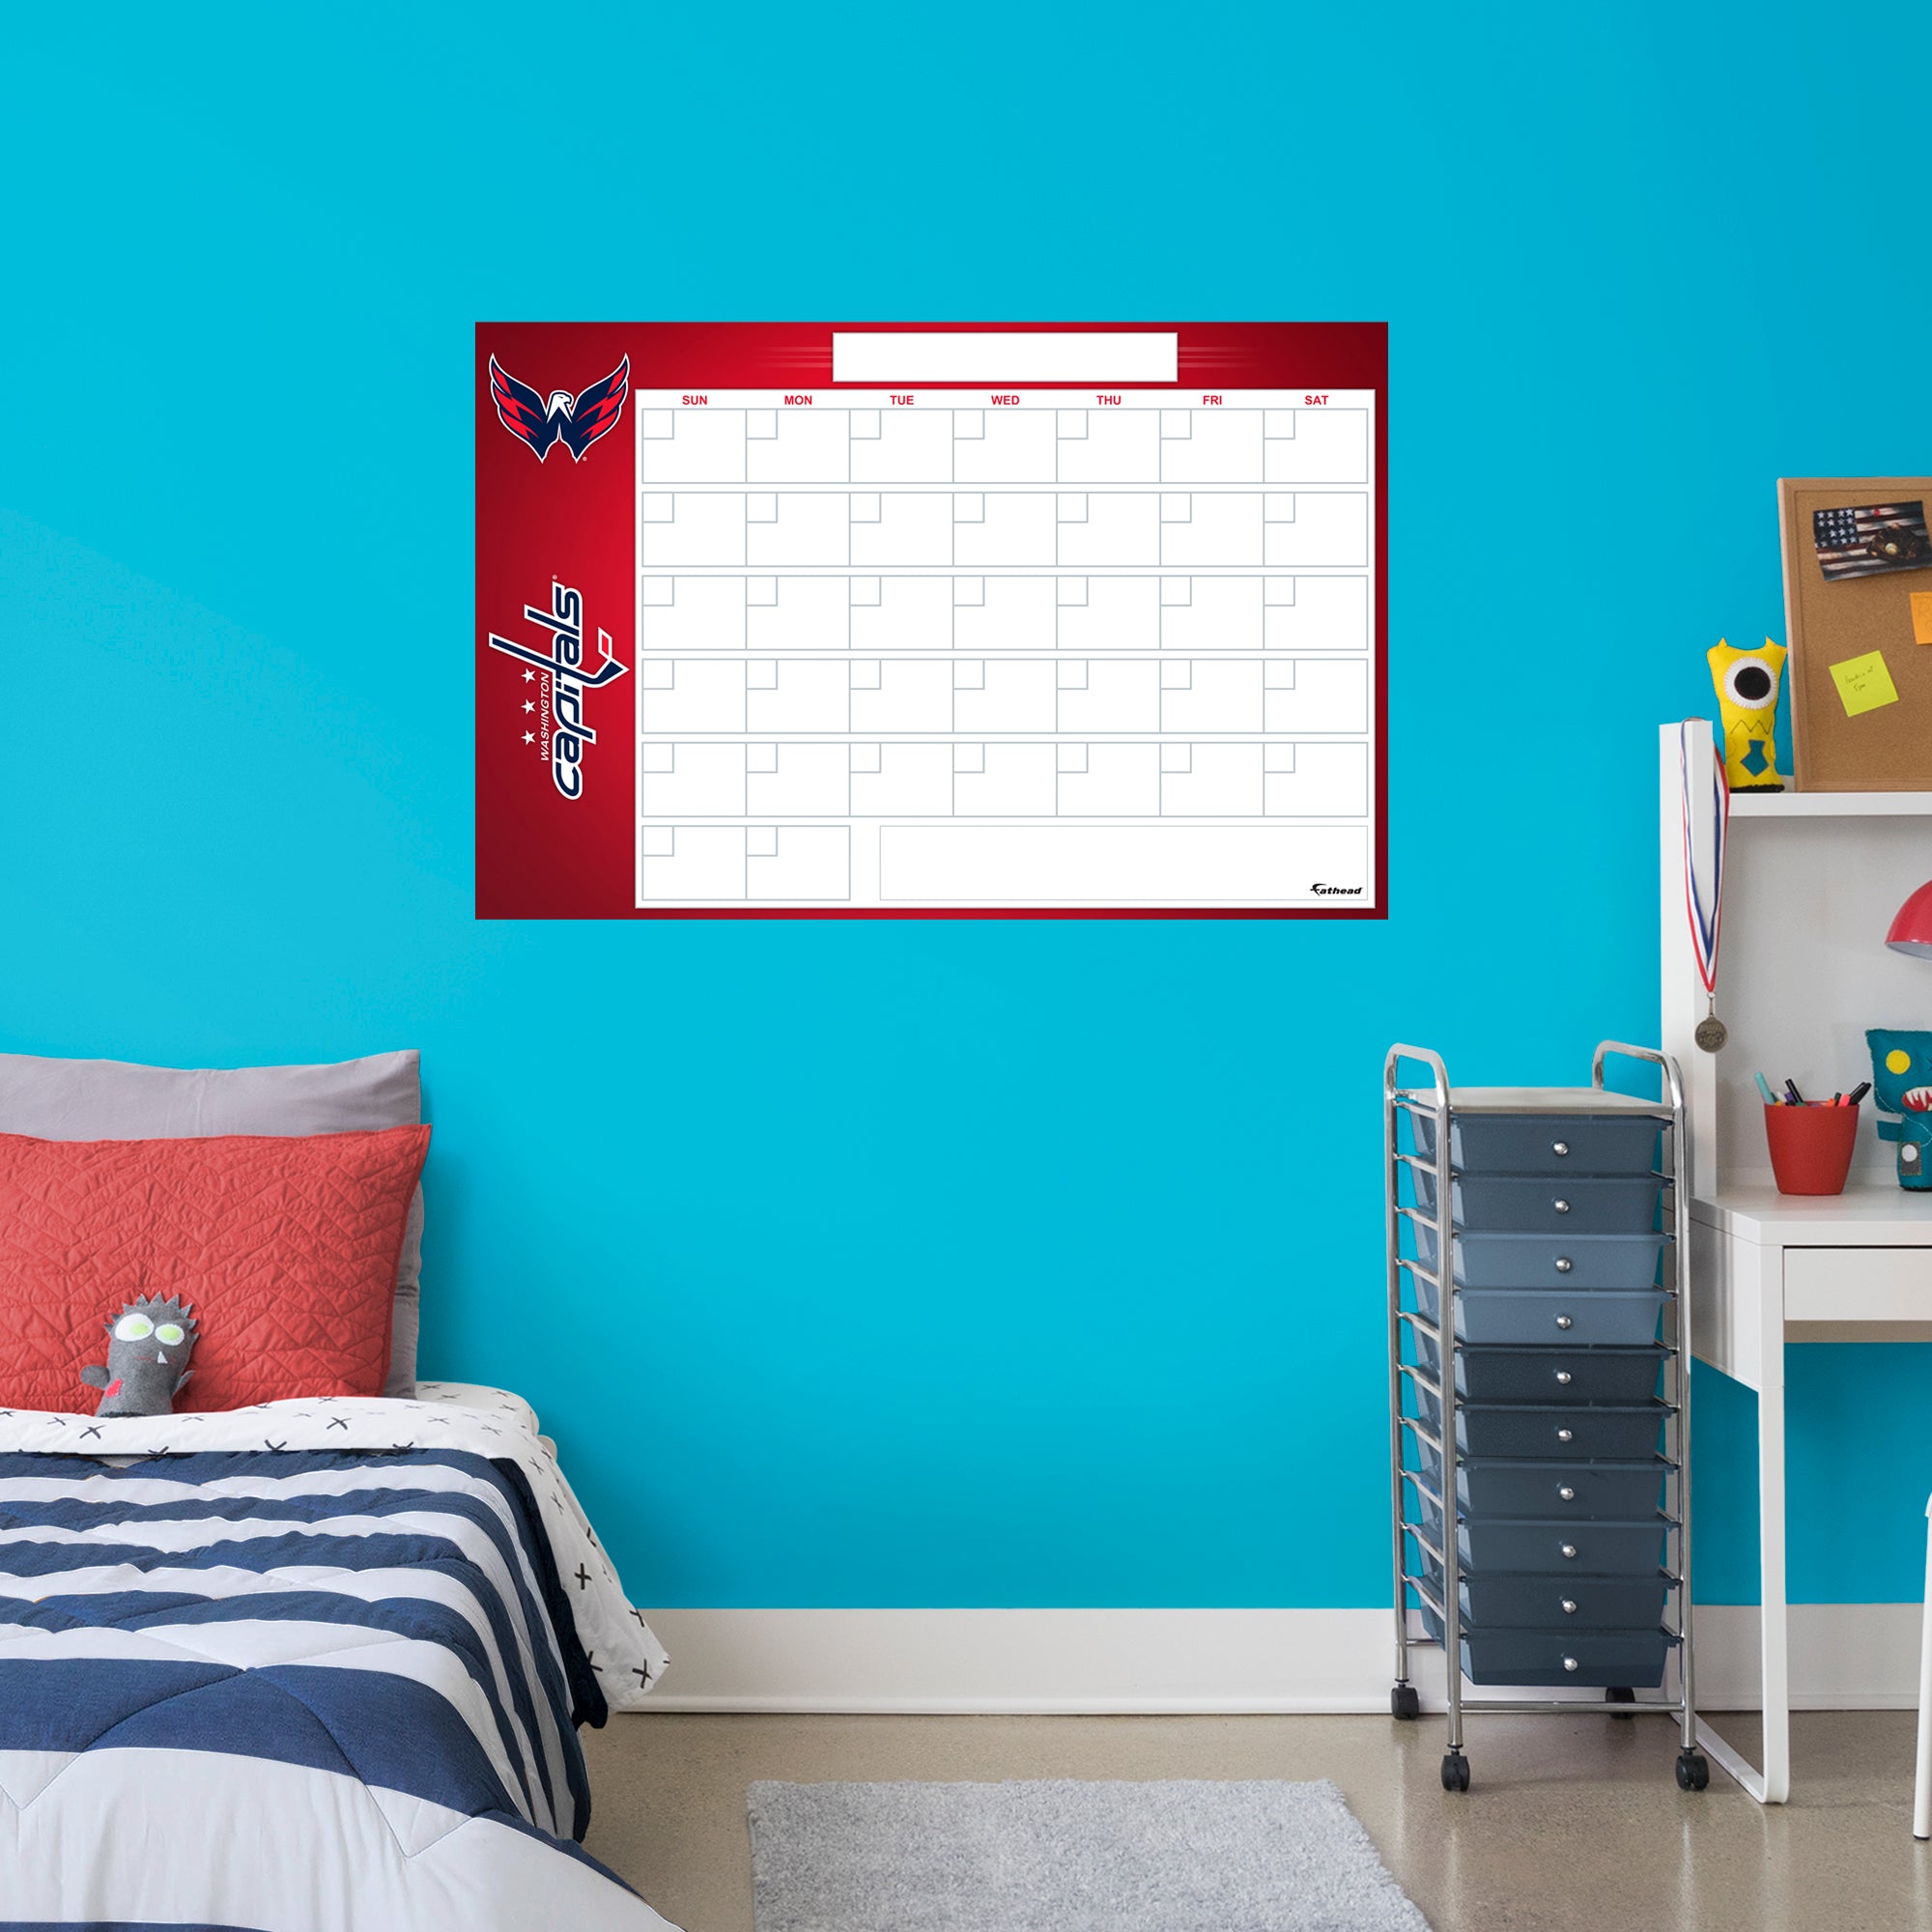 Washington Capitals Dry Erase Calendar - Officially Licensed NHL Removable Wall Decal Giant Decal (57"W x 34"H) by Fathead | Vin